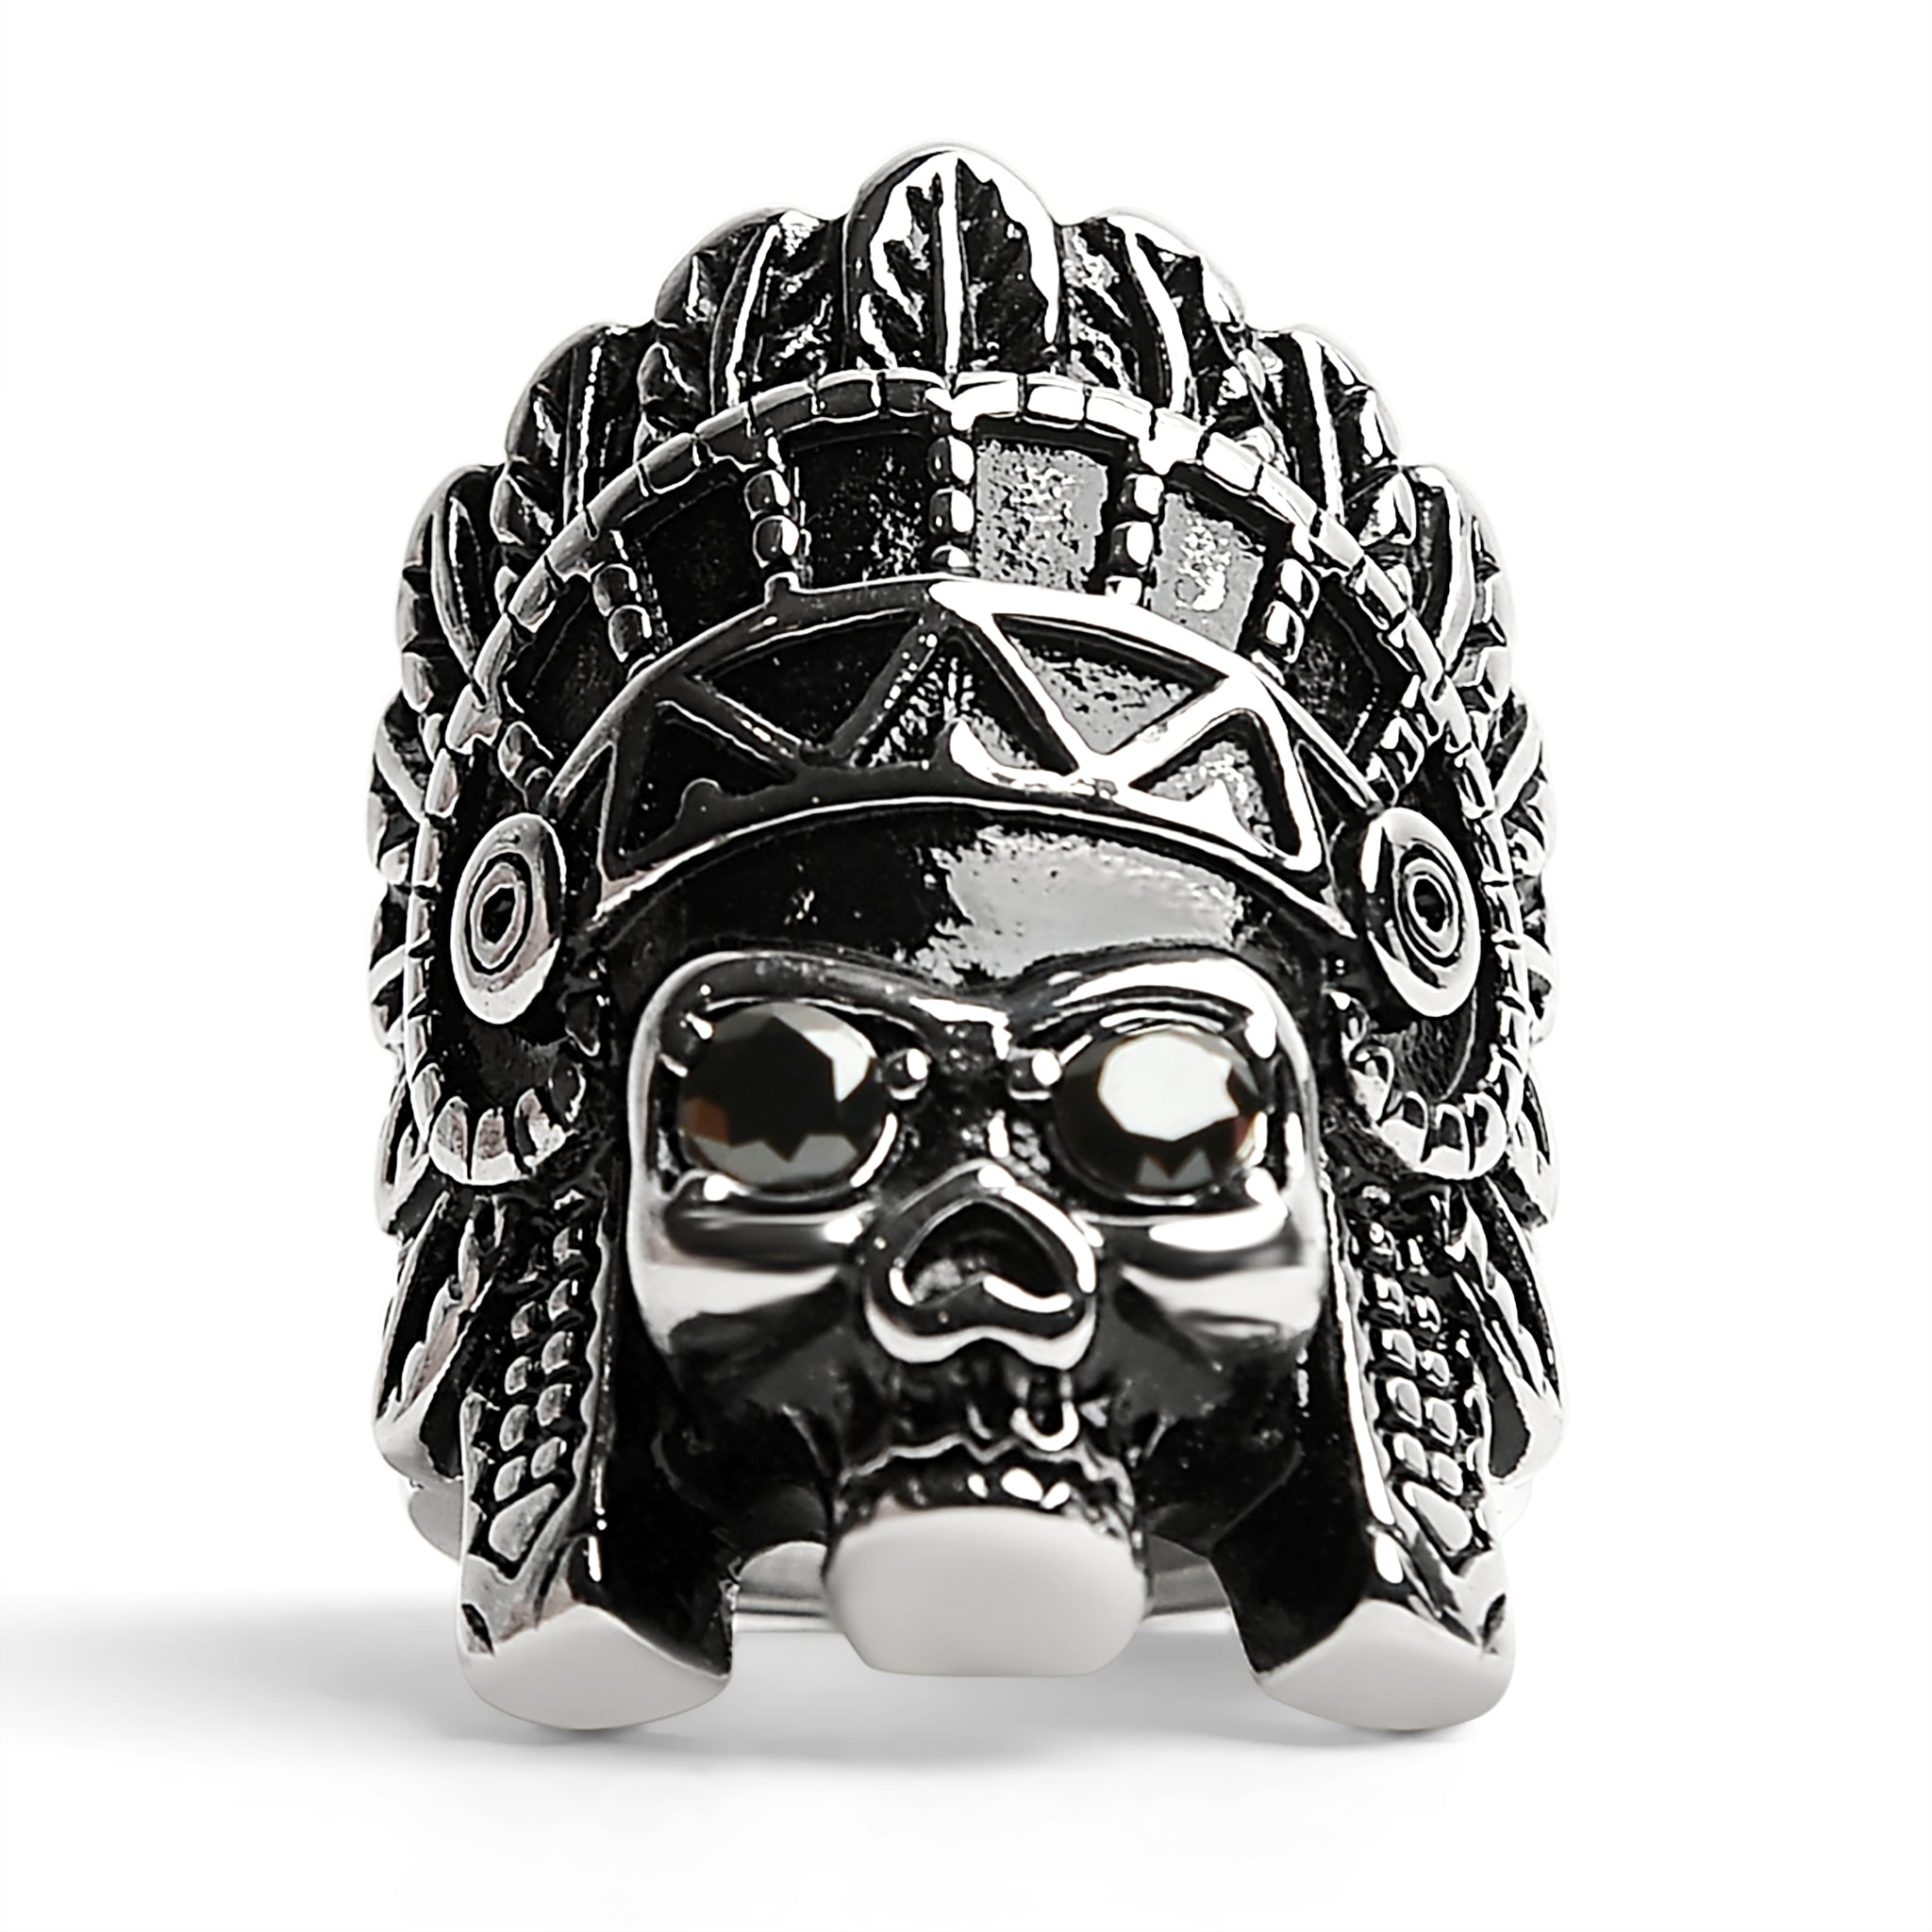 Stainless Steel Native American Chief Skull Ring with Black CZ Stone - Jewelry & Watches - Bijou Her -  -  - 